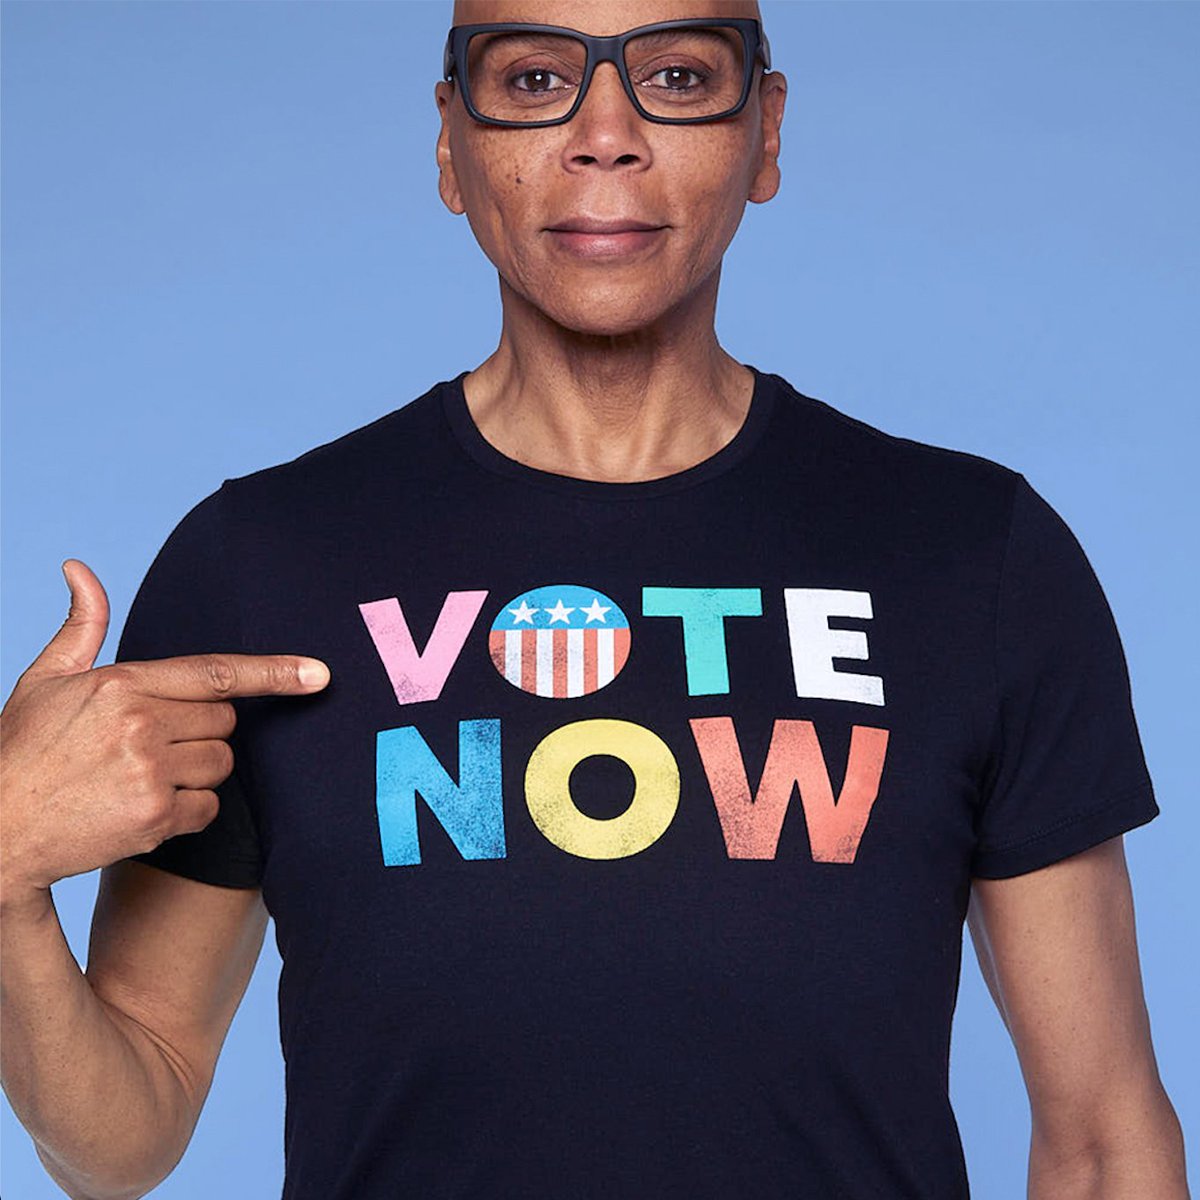 🗣 GET 👏🏾 YOUR 👏🏾 VOTE 👏🏾 ON 👏🏾 ! @oldnavy is spreading the word & they’re paying their employees to work the polls on Election Day. PLUS: We’re cooking up something special for the #RuPaulidays. Stay tuned & make a plan to vote. #oldnavystyle #itsuptoWE #spottedinoldnavy